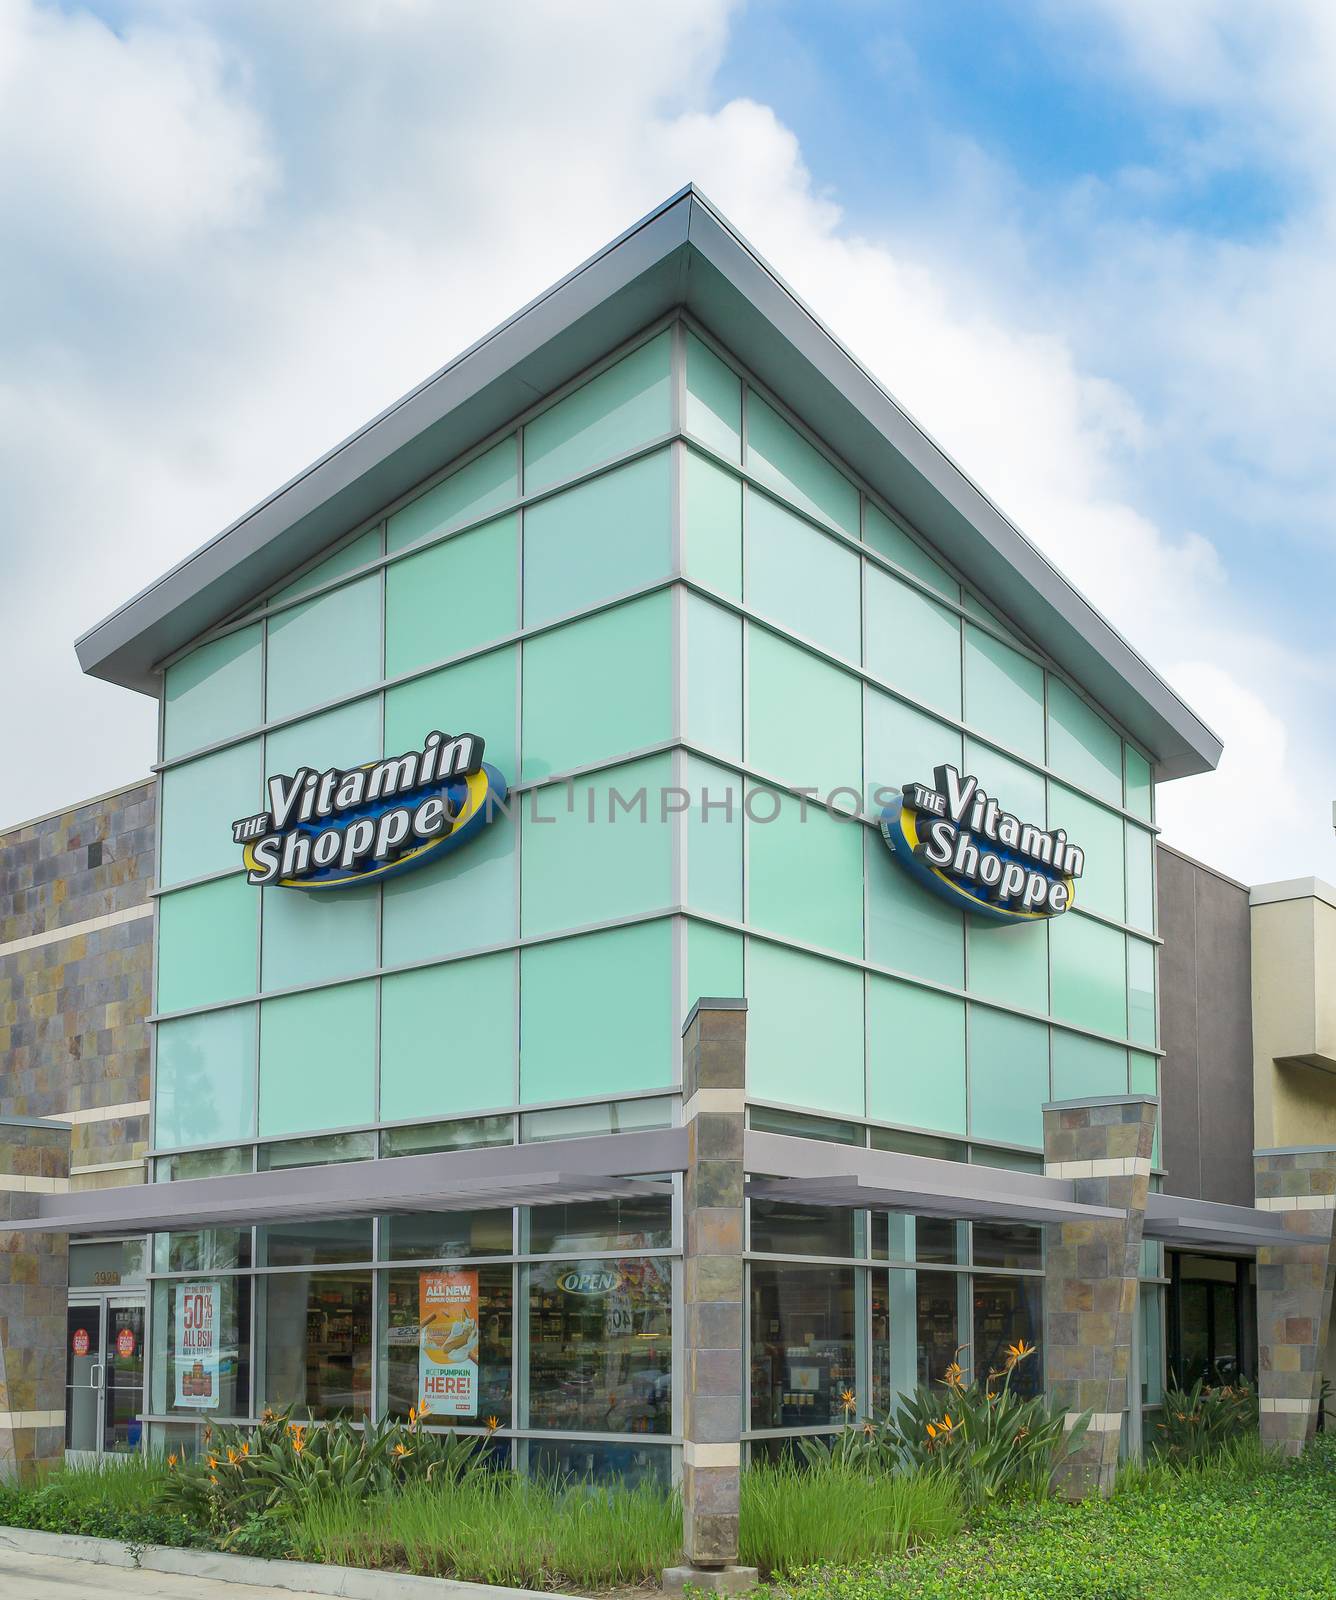 COSTA MESA, CA/USA - OCTOBER 17, 2015: The Vitamin Shoppe retail store exterior. The Vitamin Shoppe is an American retailer of nutritional supplements.